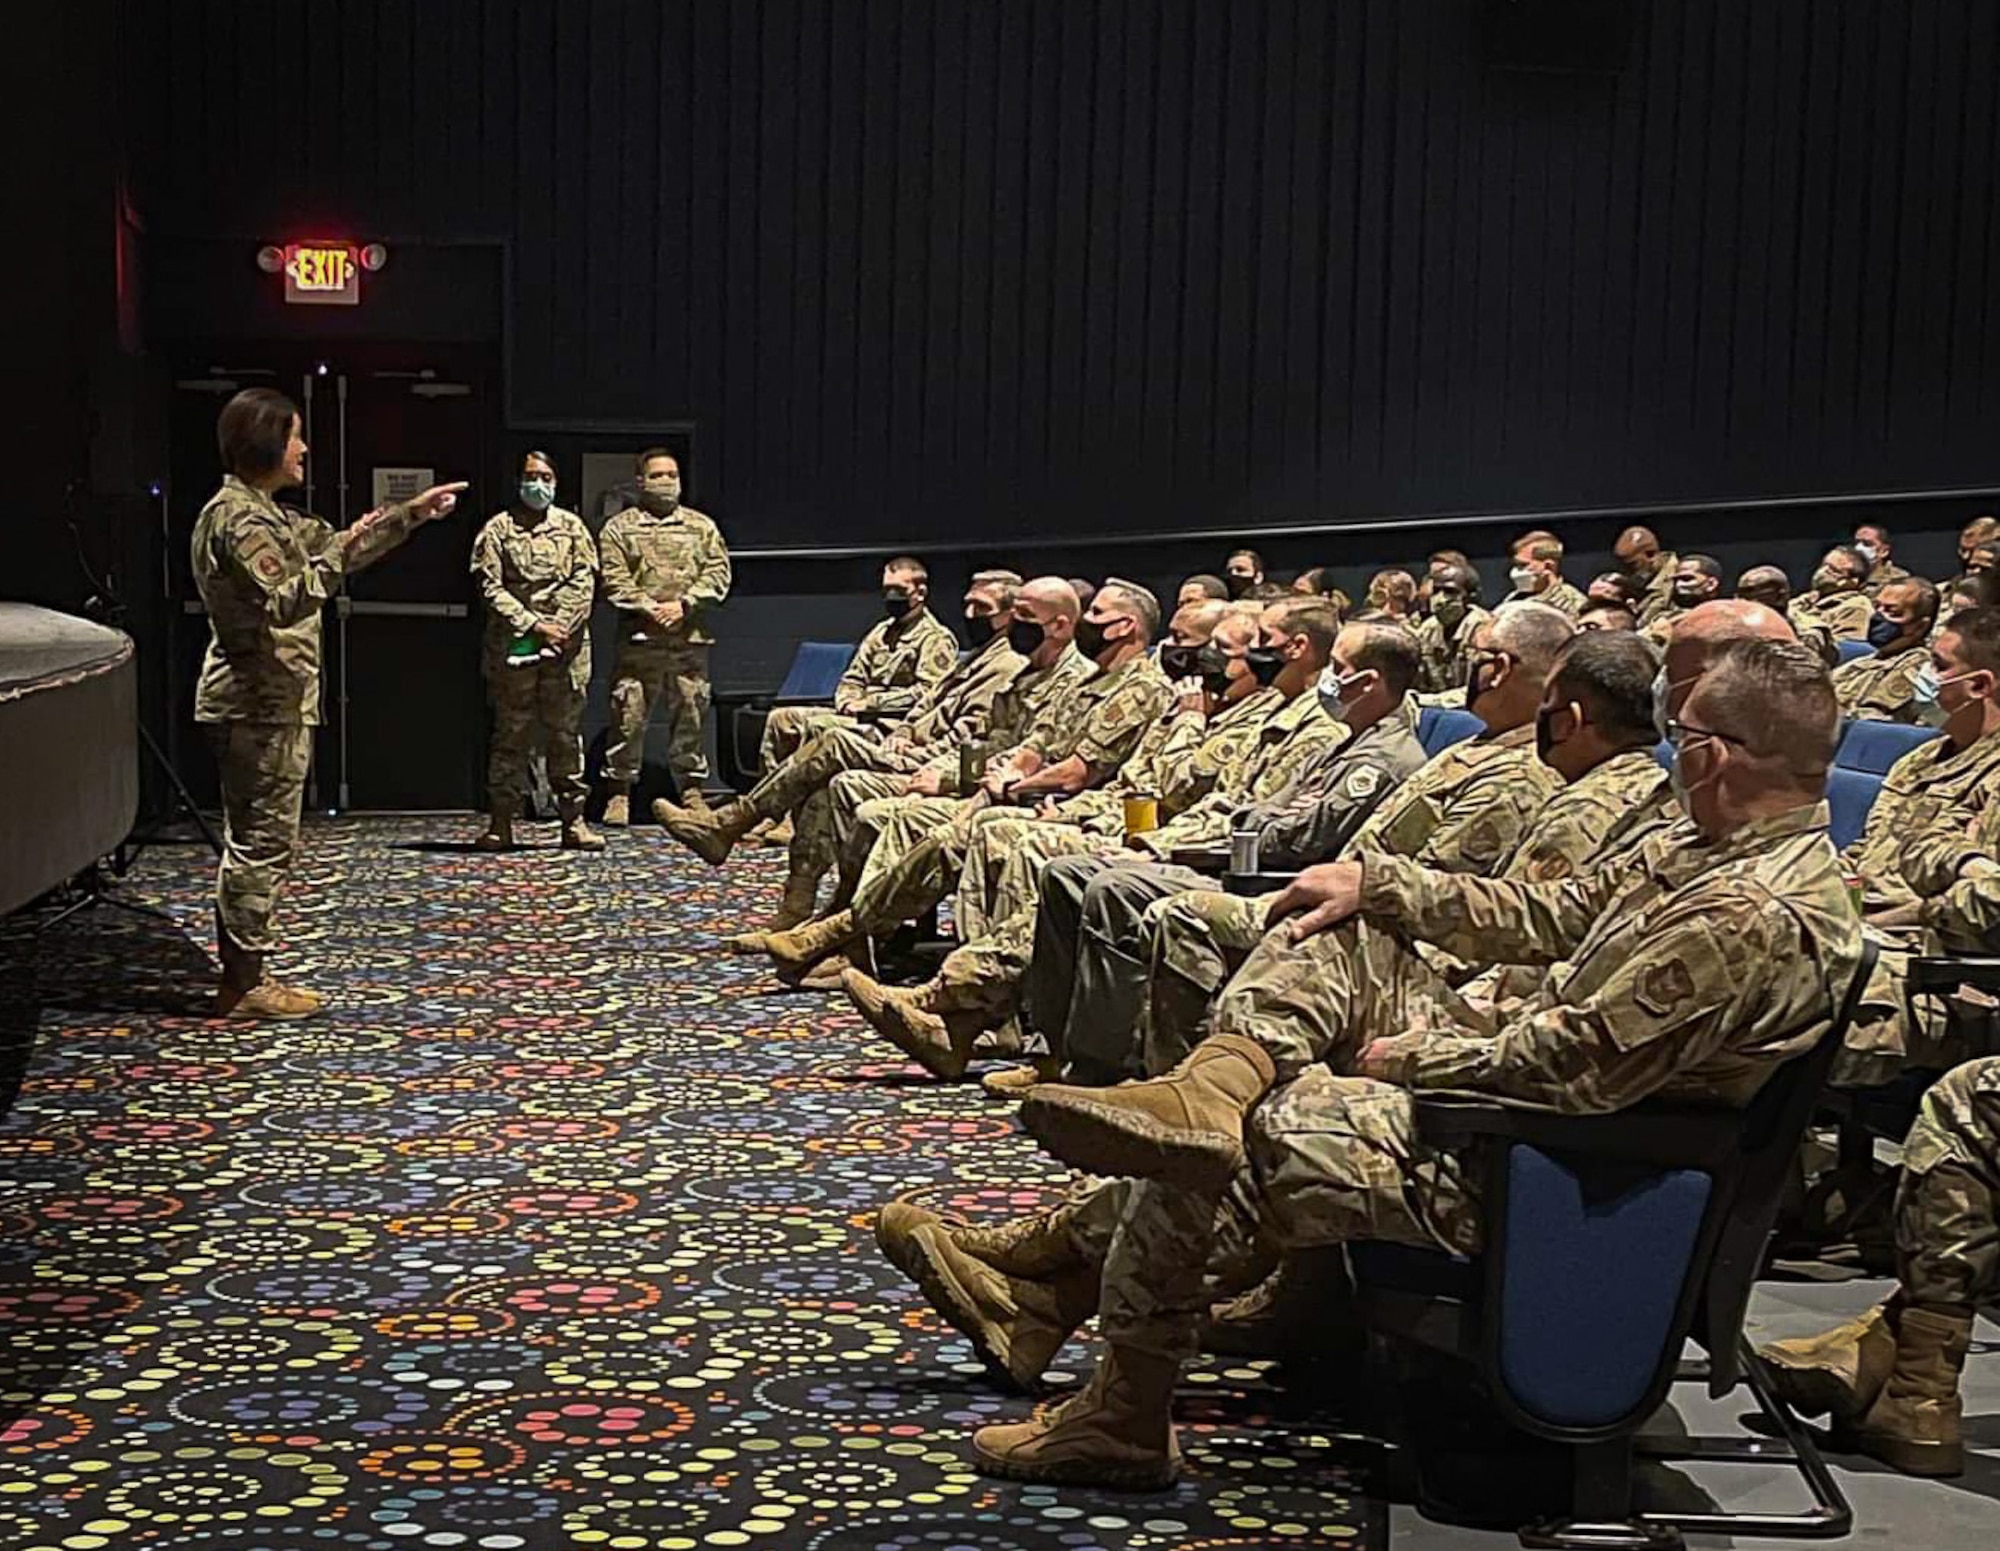 (left) Chief Master Sgt. of the Air Force JoAnne S. Bass speaks with Reserve Citizen Airmen from Tenth Air Force and the 301st Fighter Wing during the All-Call event at Naval Air Station Joint Reserve Base Fort Worth, Texas, Nov. 6, 2021. Chief Bass provides direction for the enlisted force and represents their interests, as appropriate, to the American public and to those in all levels of government. (U.S. Air Force photo by Capt. Jessica Gross)